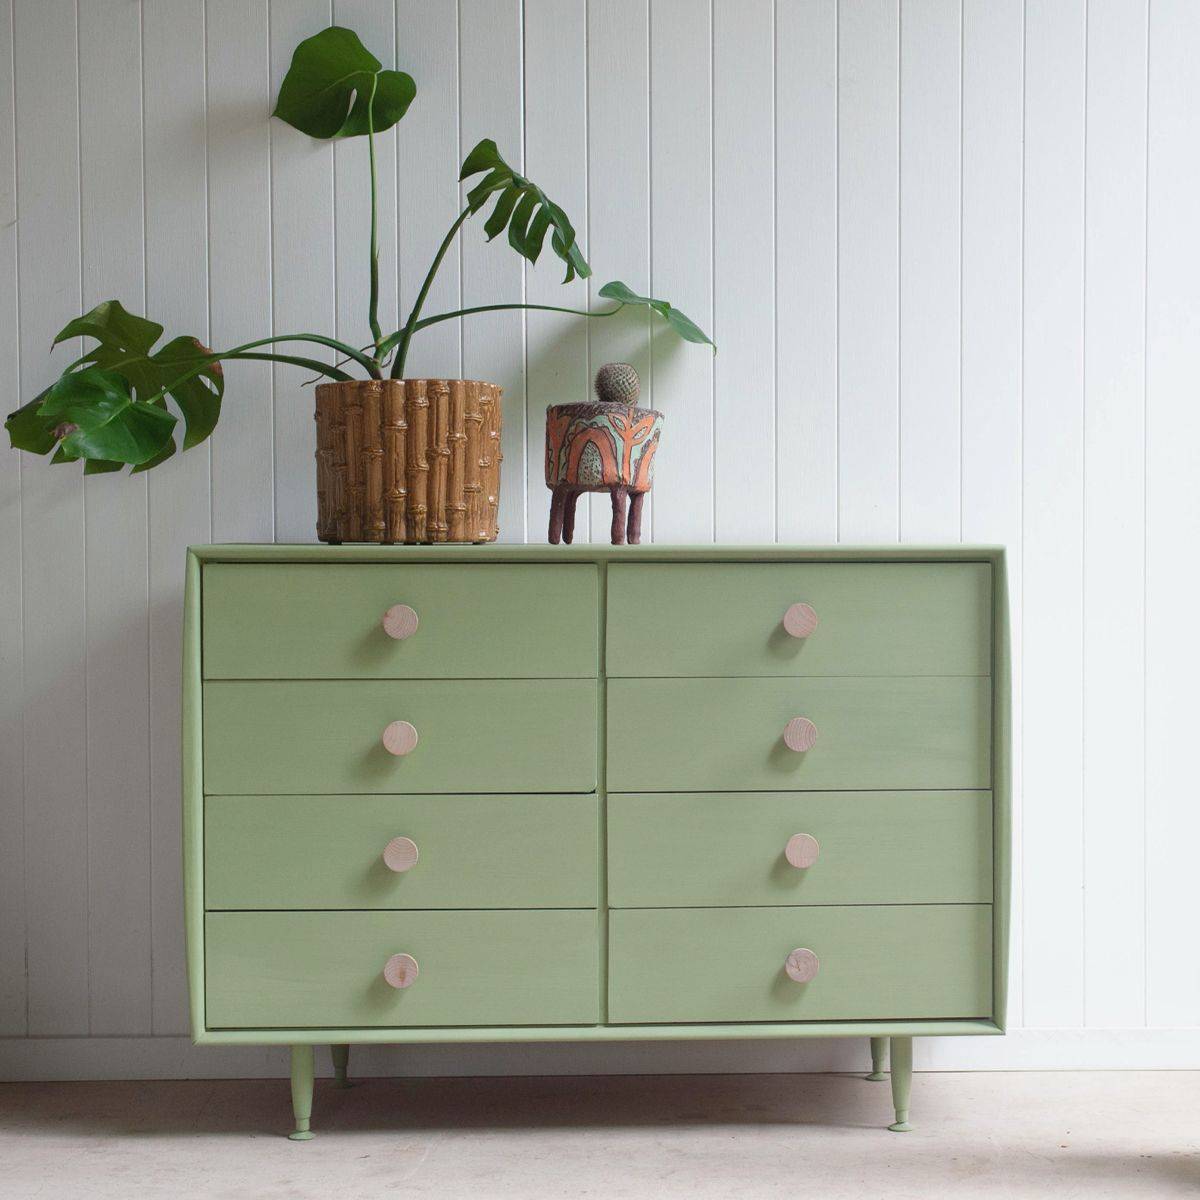 Pistachio drawer is ideal accent for modern bedrooms (from Attic Furniture QLD)